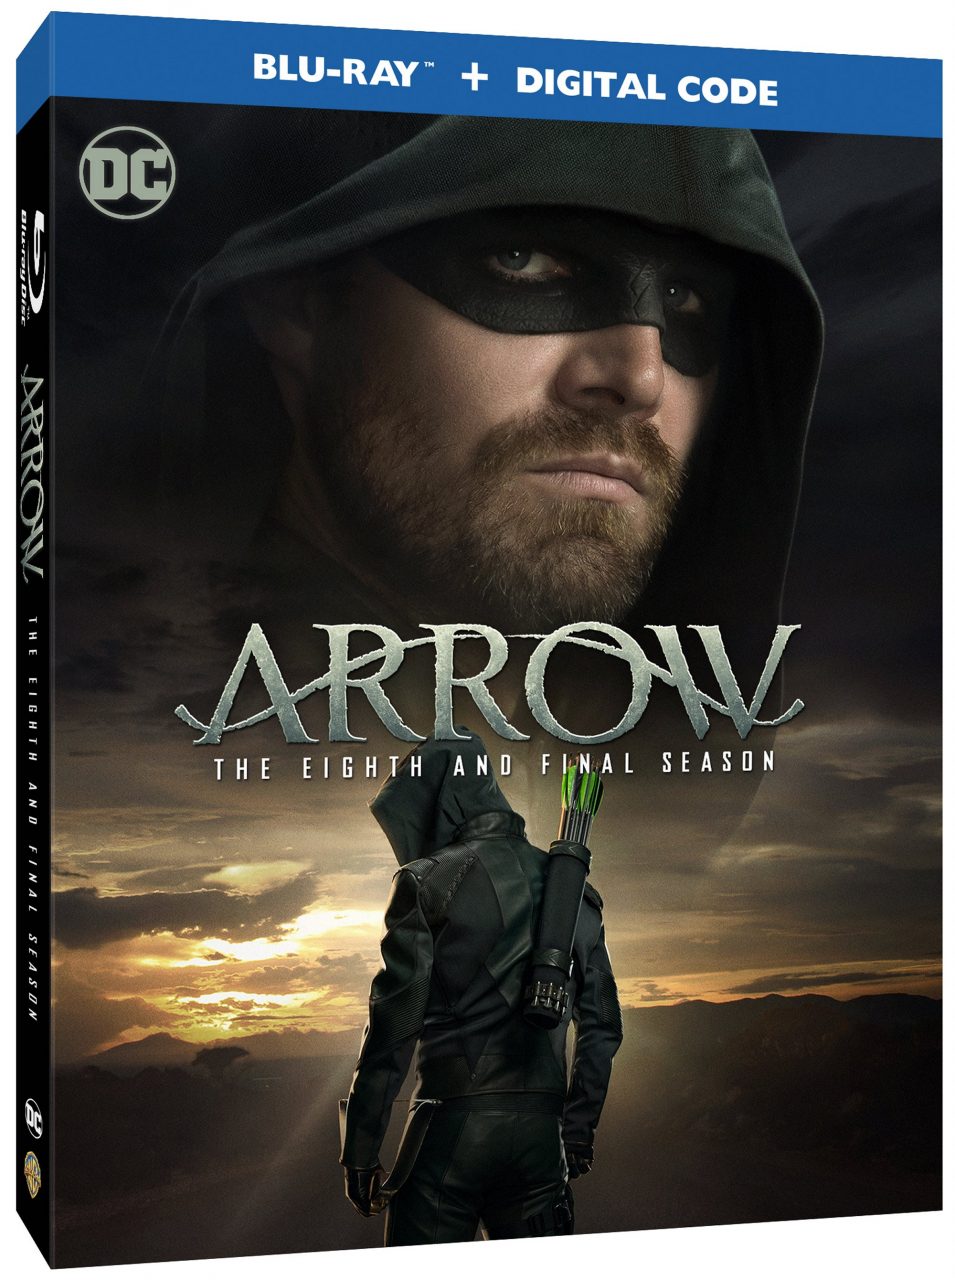 Arrow: The Eighth And Final Season Blu-Ray Combo Pack cover (Warner Bros. Home Entertainment)